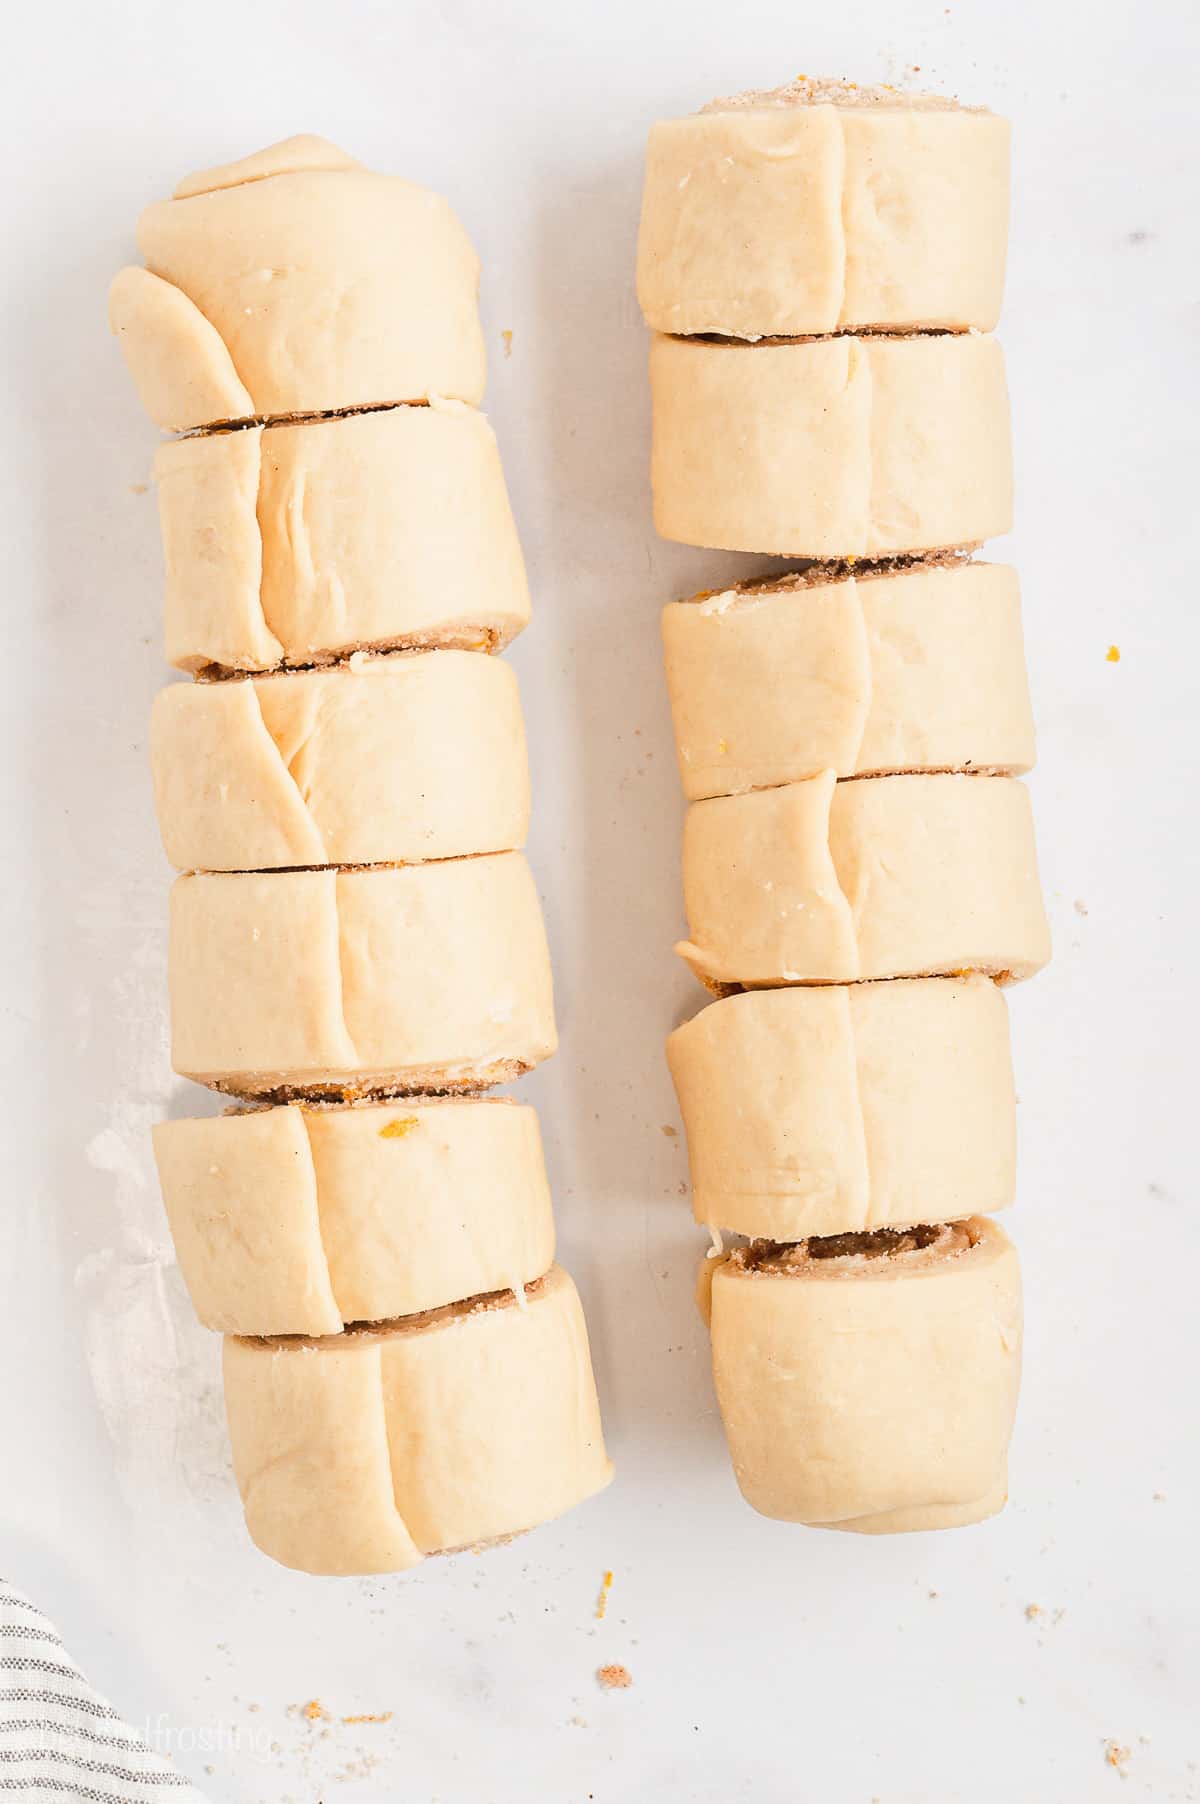 Overhead view of two logs of orange cinnamon roll dough sliced into 12 rolls.